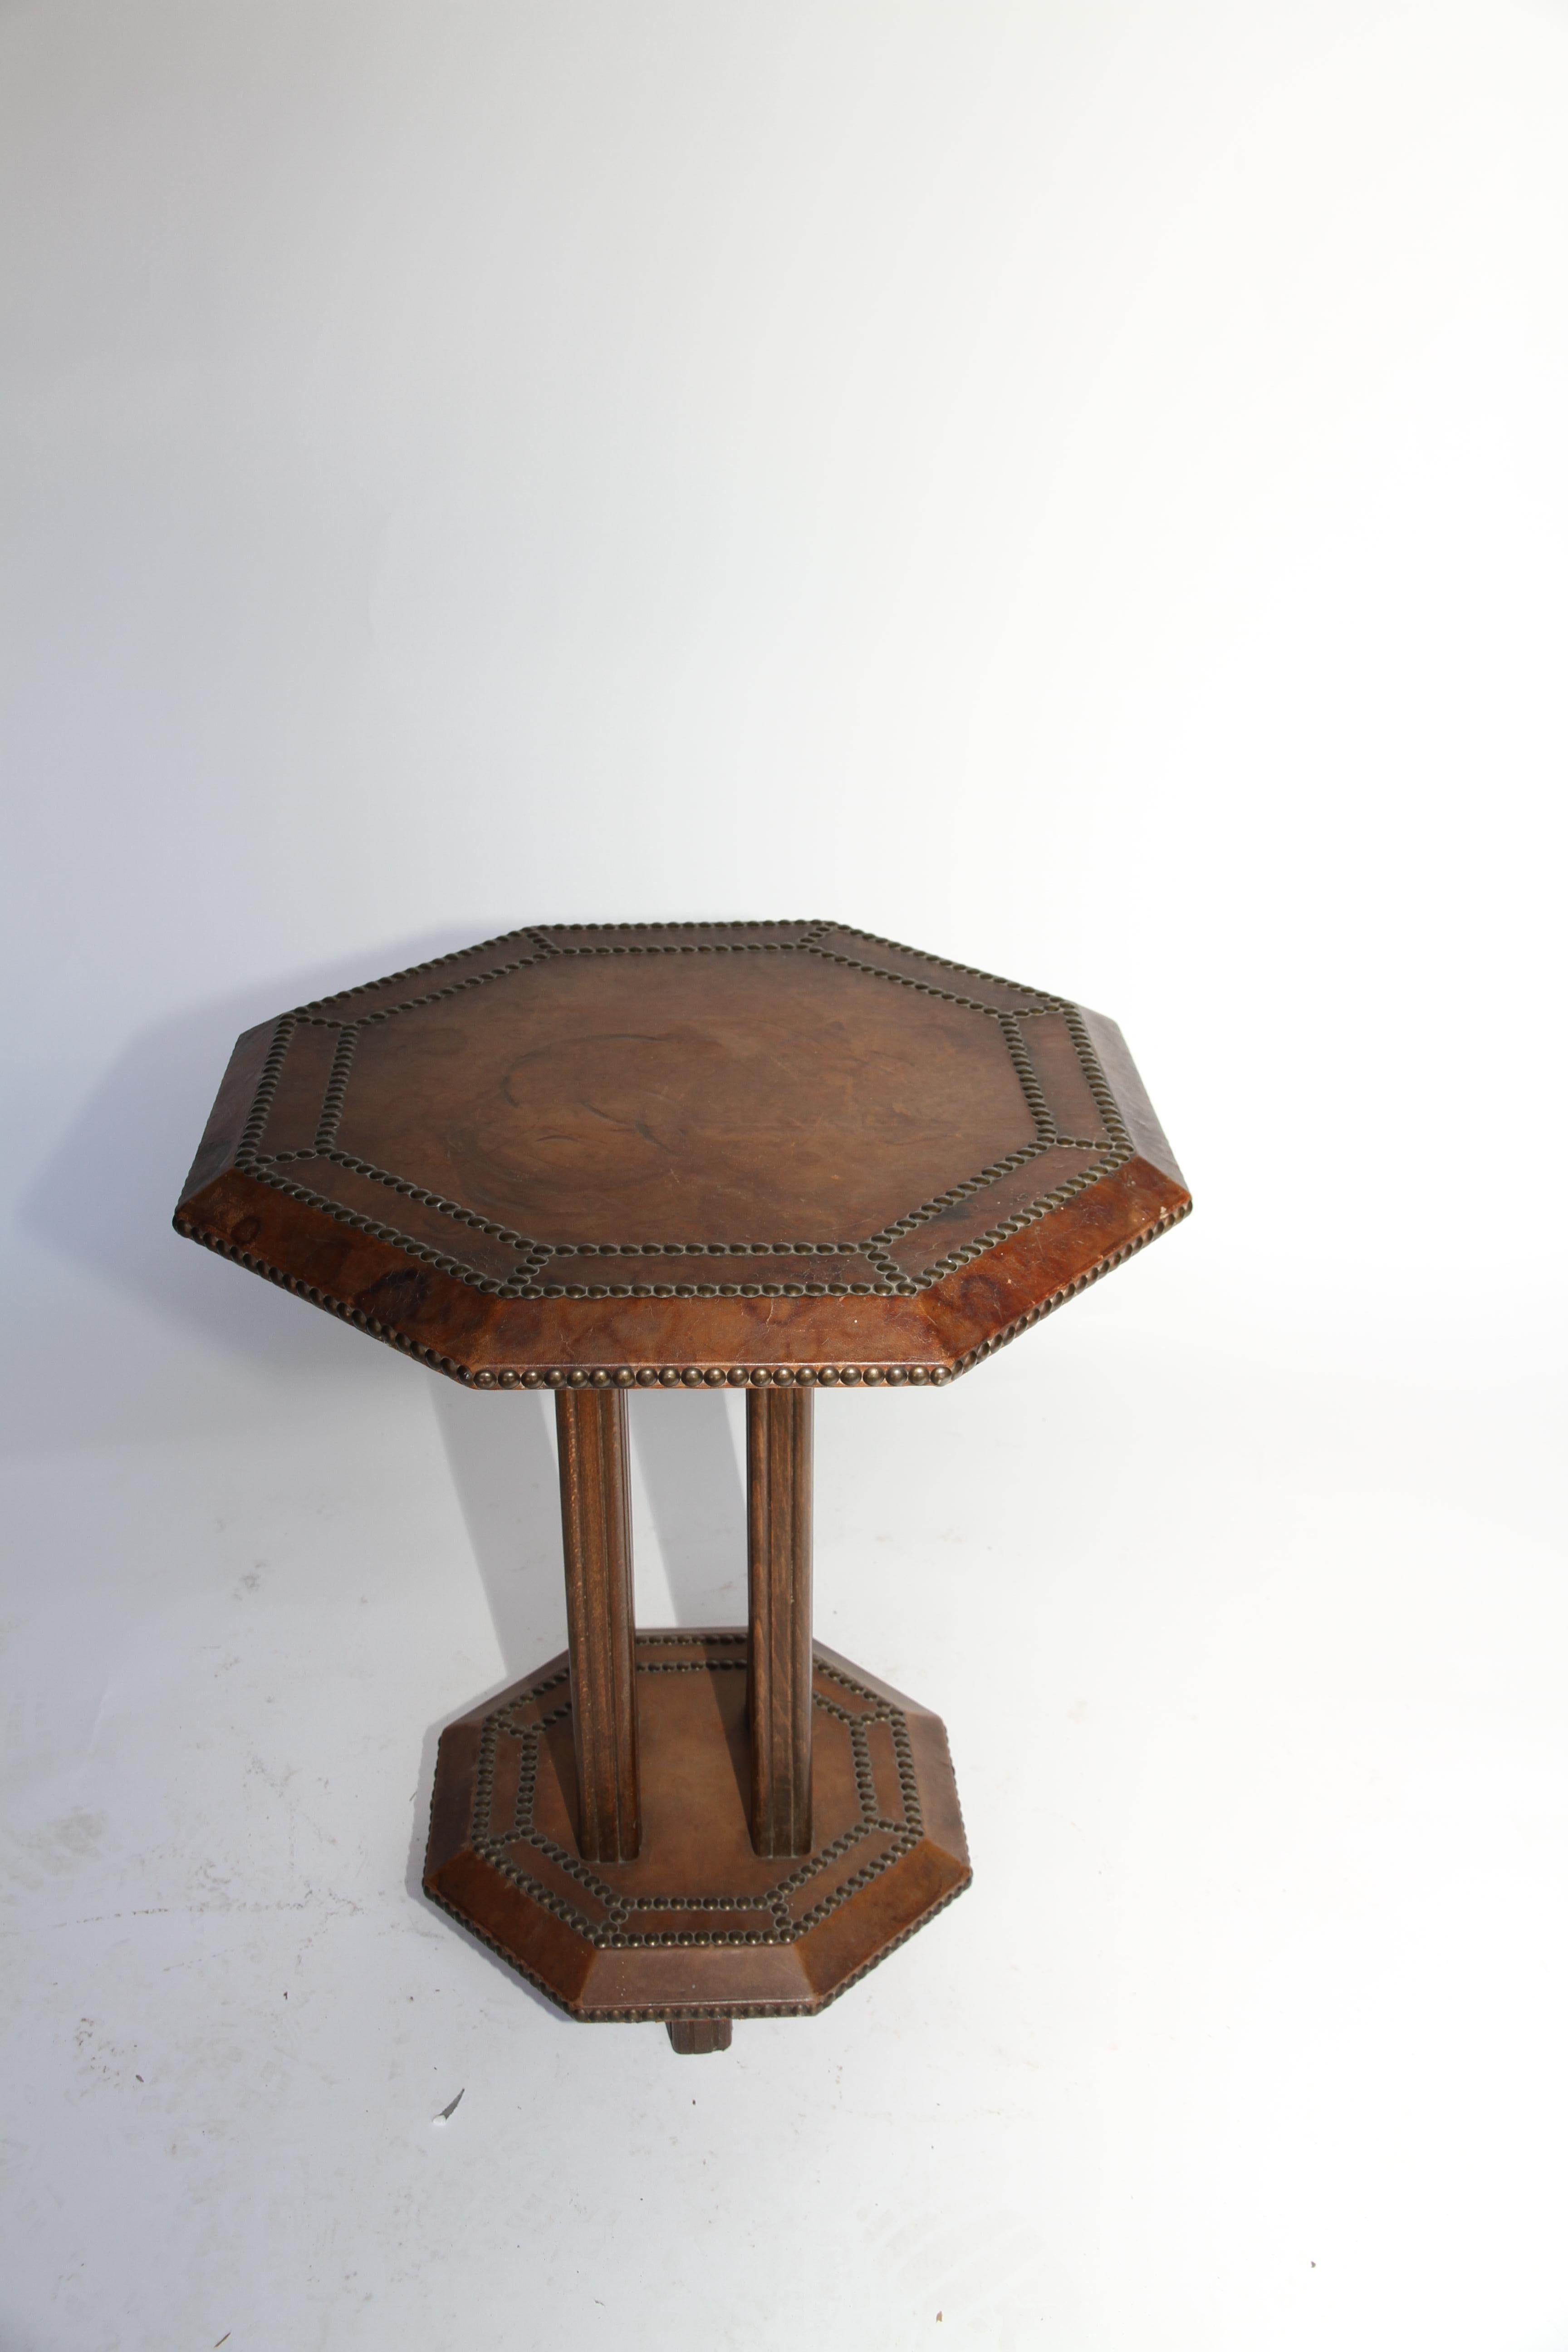 A handsome French Art Deco leather studded octagonal side table. The unique shape and brass stud detail add beauty and charm to the piece.